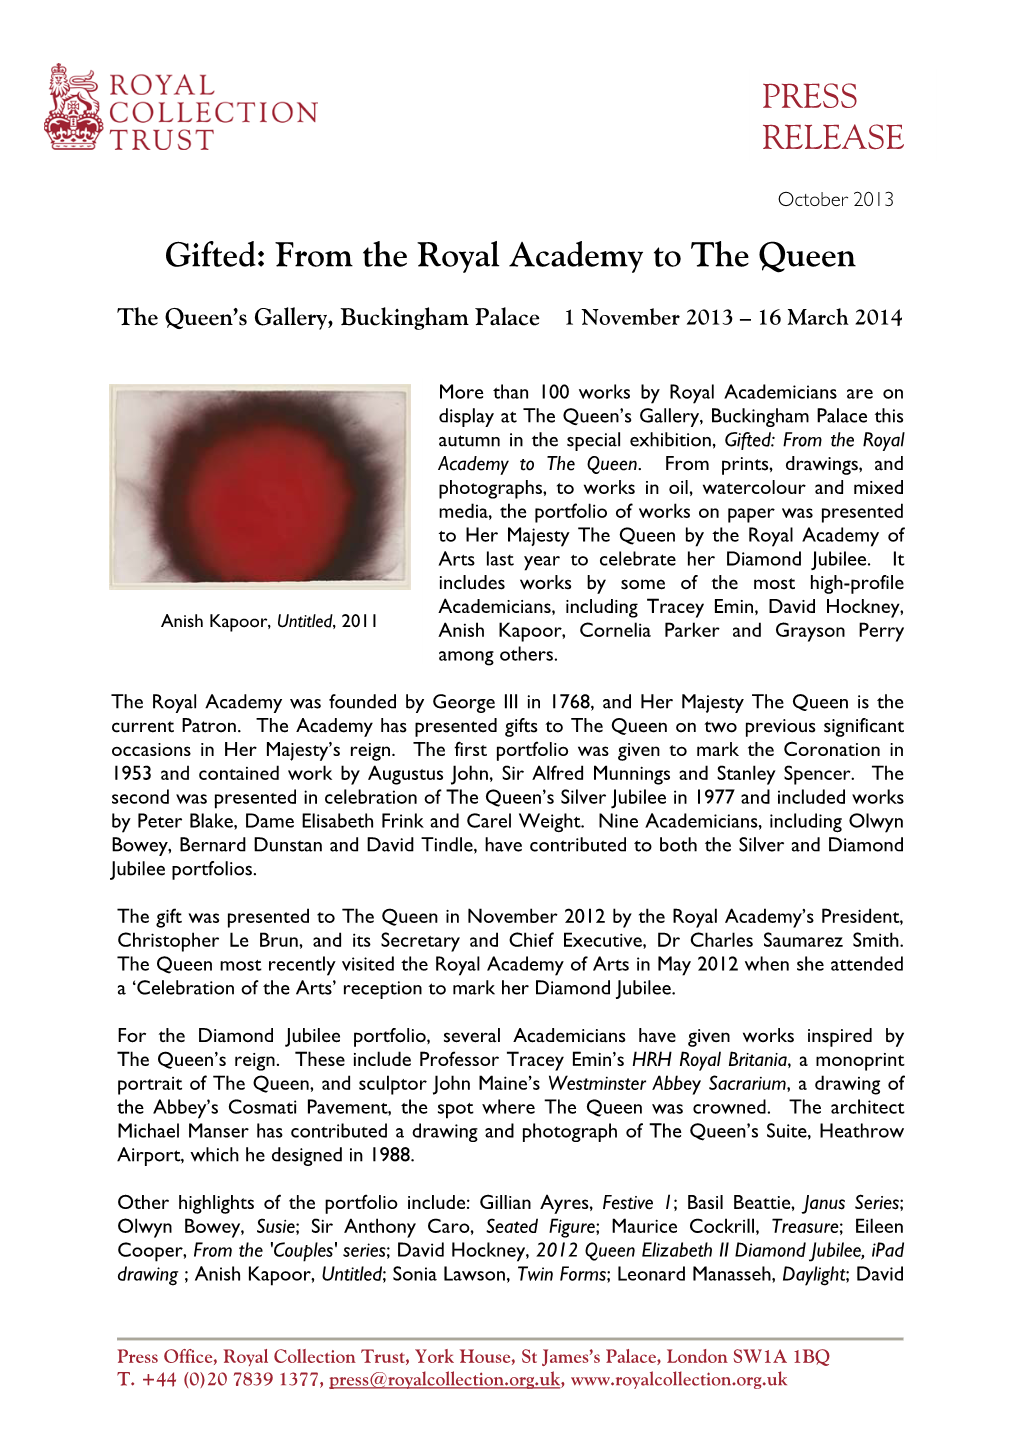 Gifted: from the Royal Academy to the Queen